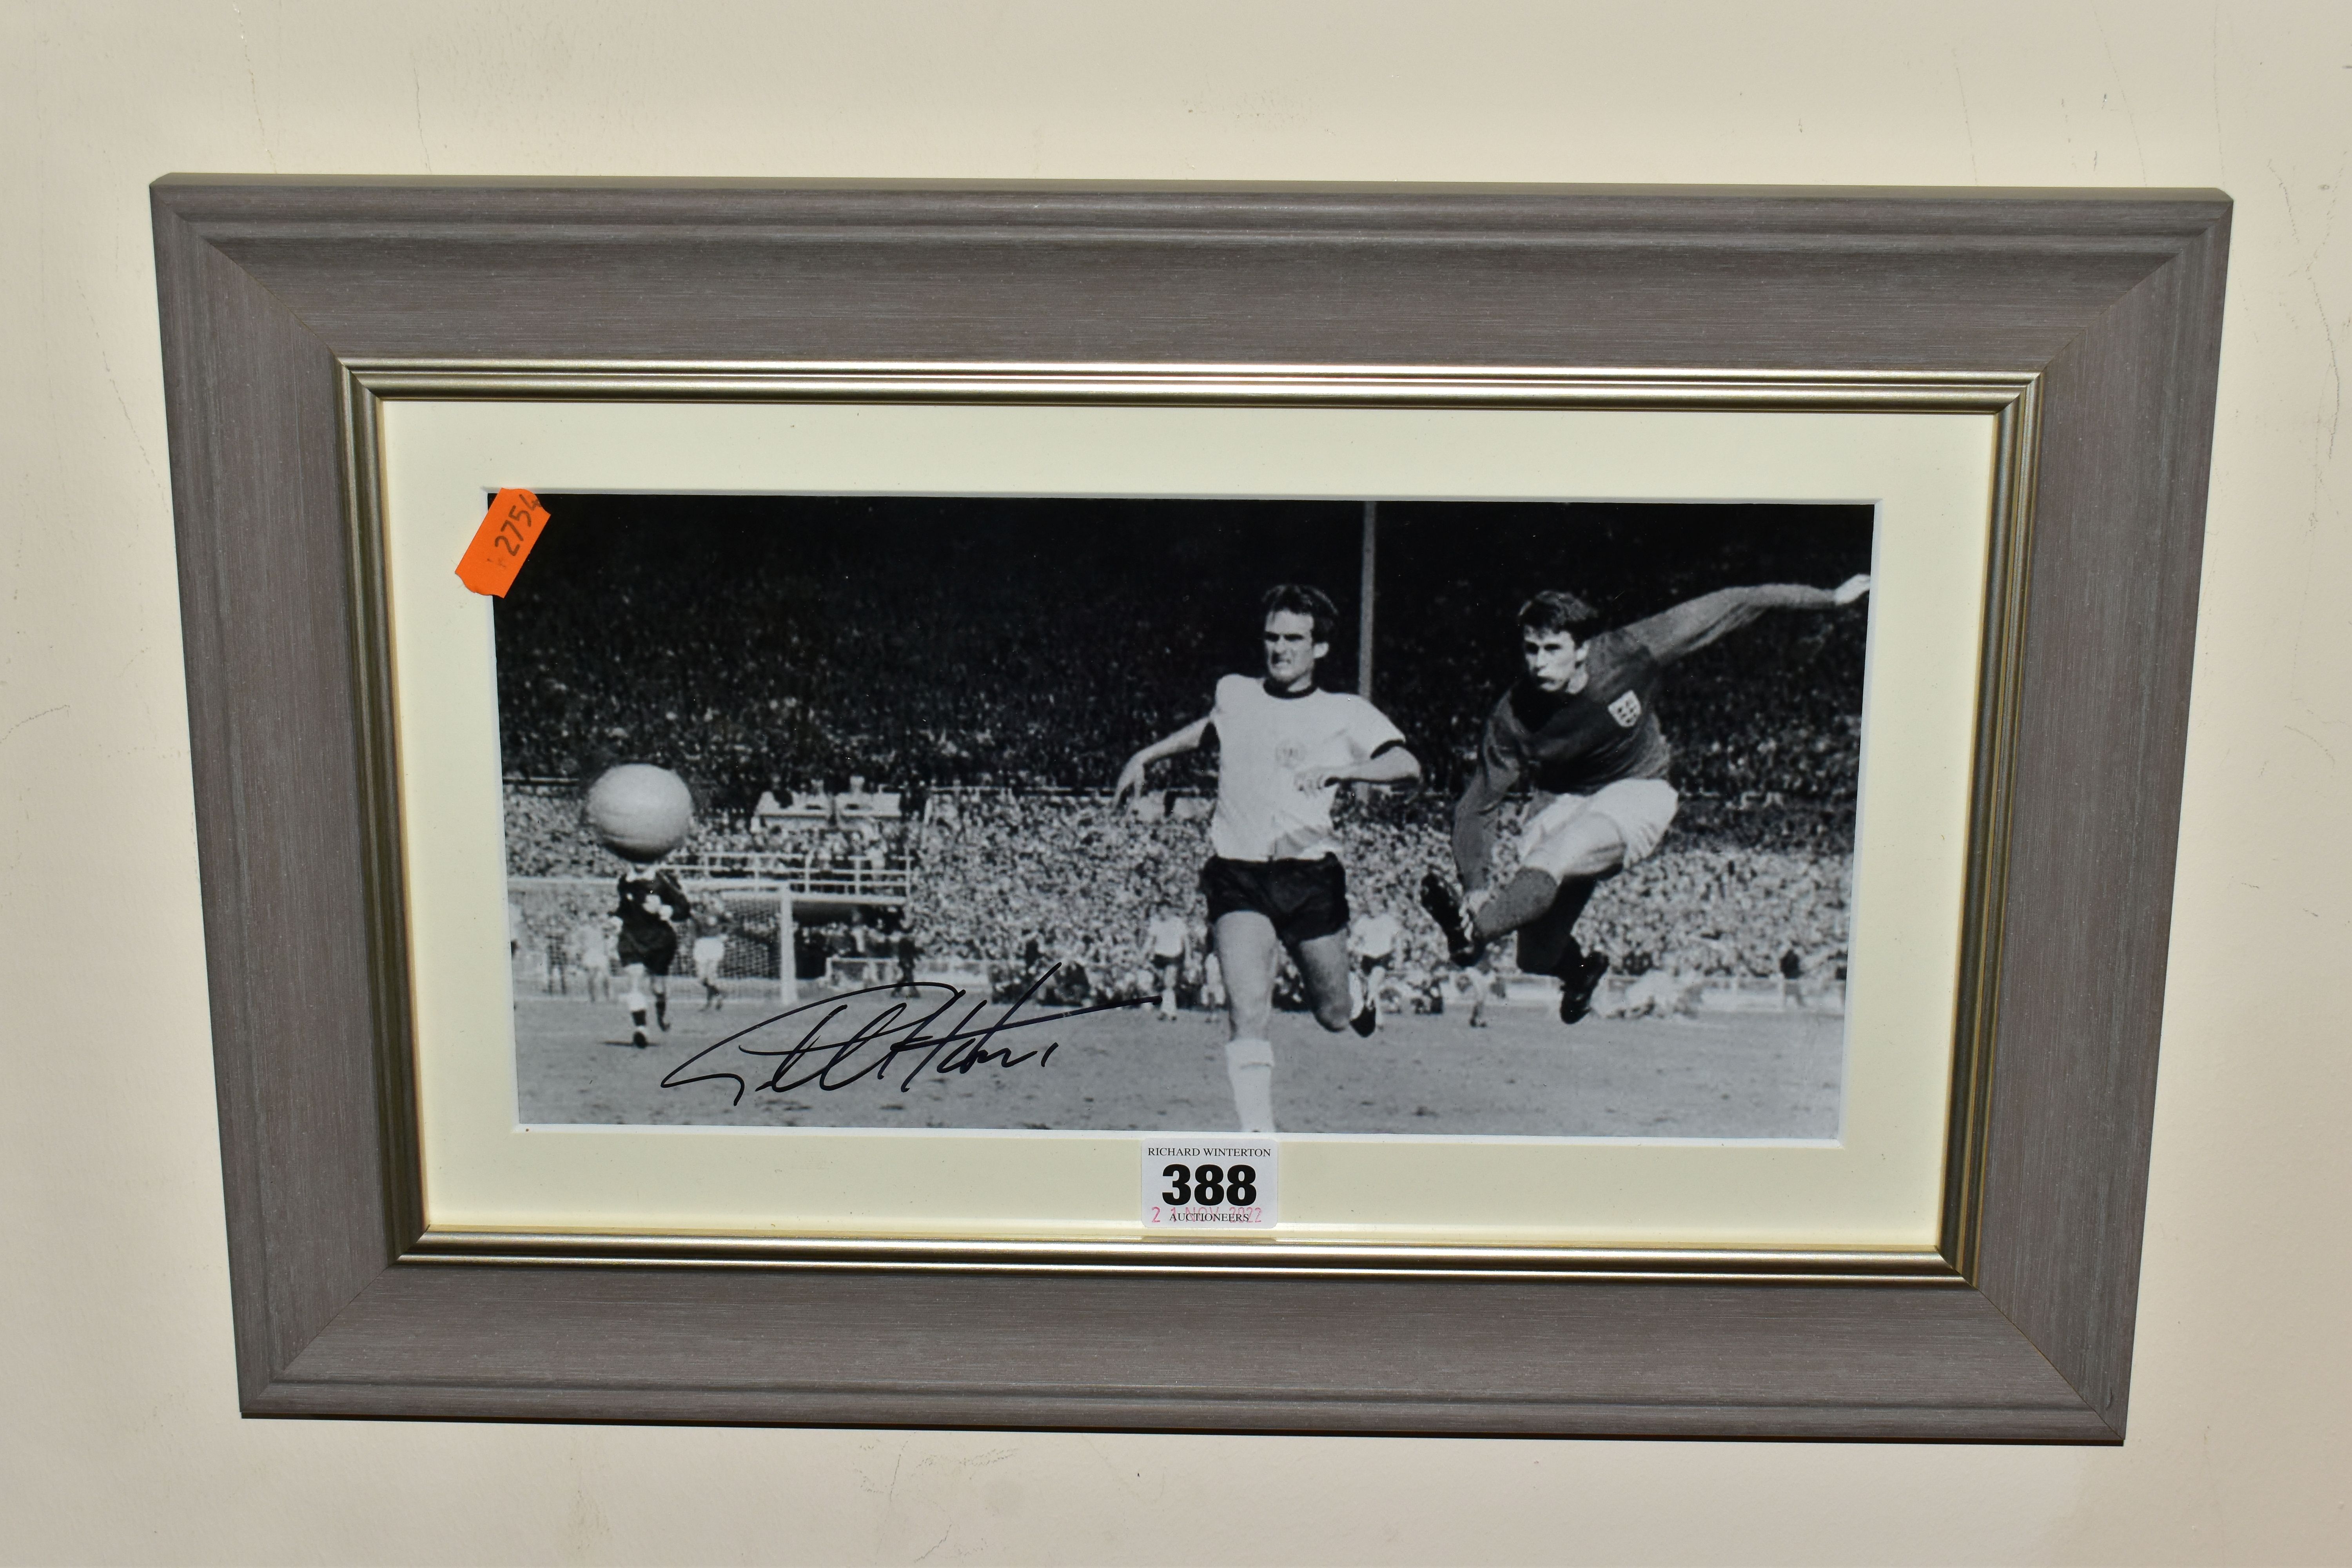 A SIGNED PHOTOGRAPH OF GEOFF HURST SCORING THE FOURTH GOAL IN DURING ENGLANDS 1966 WORLD CUP WIN,